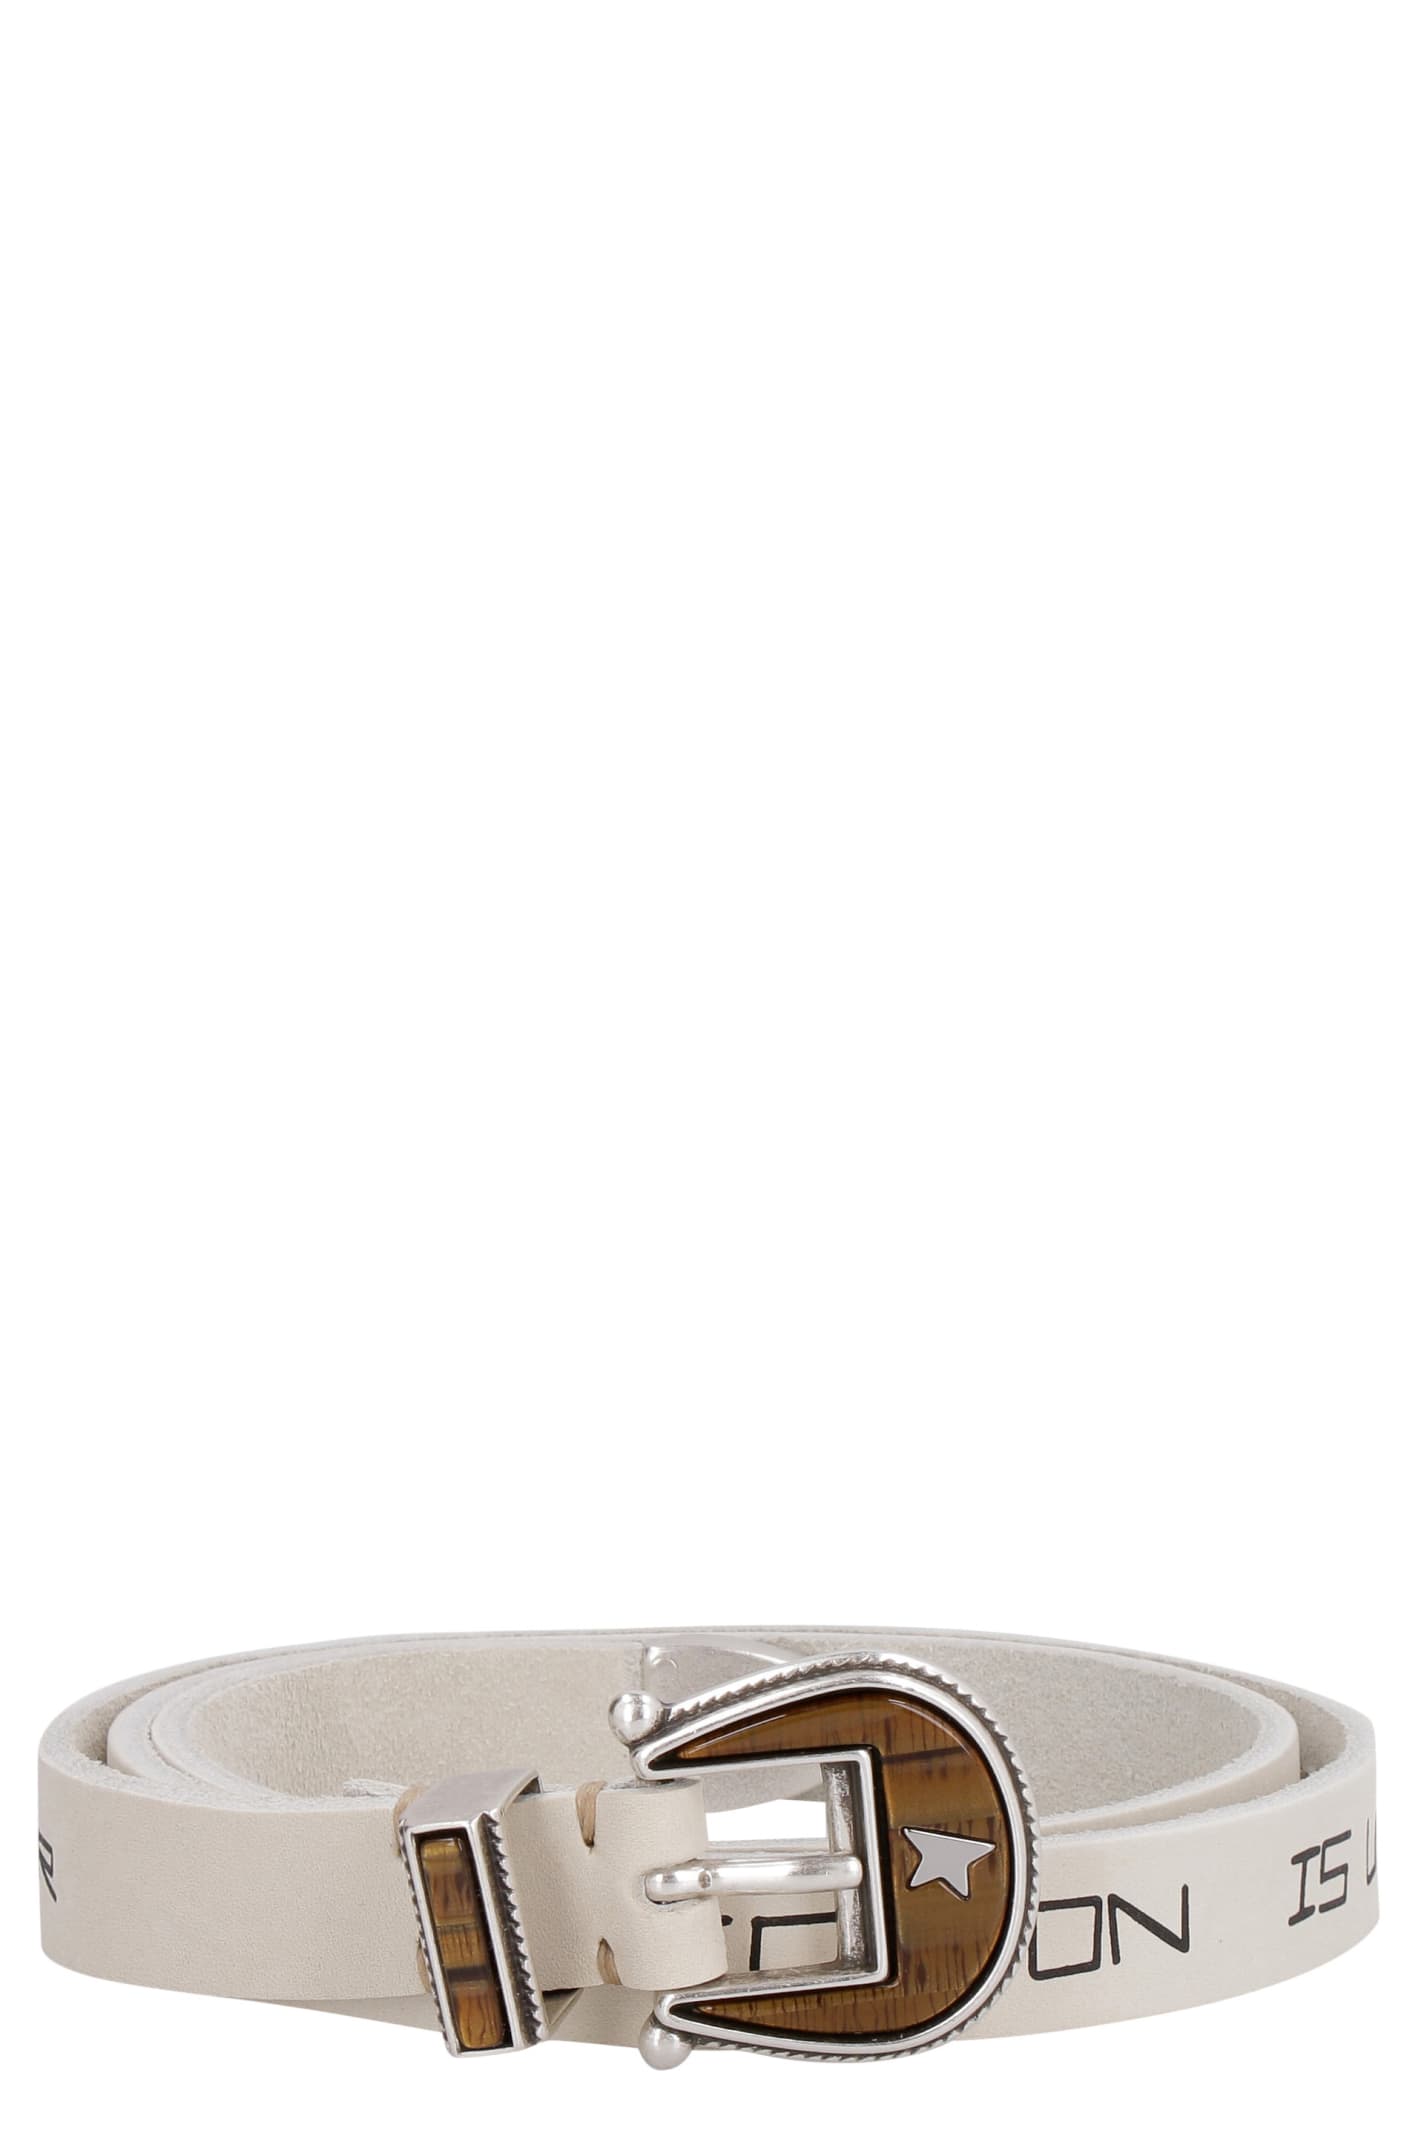 Golden Goose Rodeo Printed Leather Belt